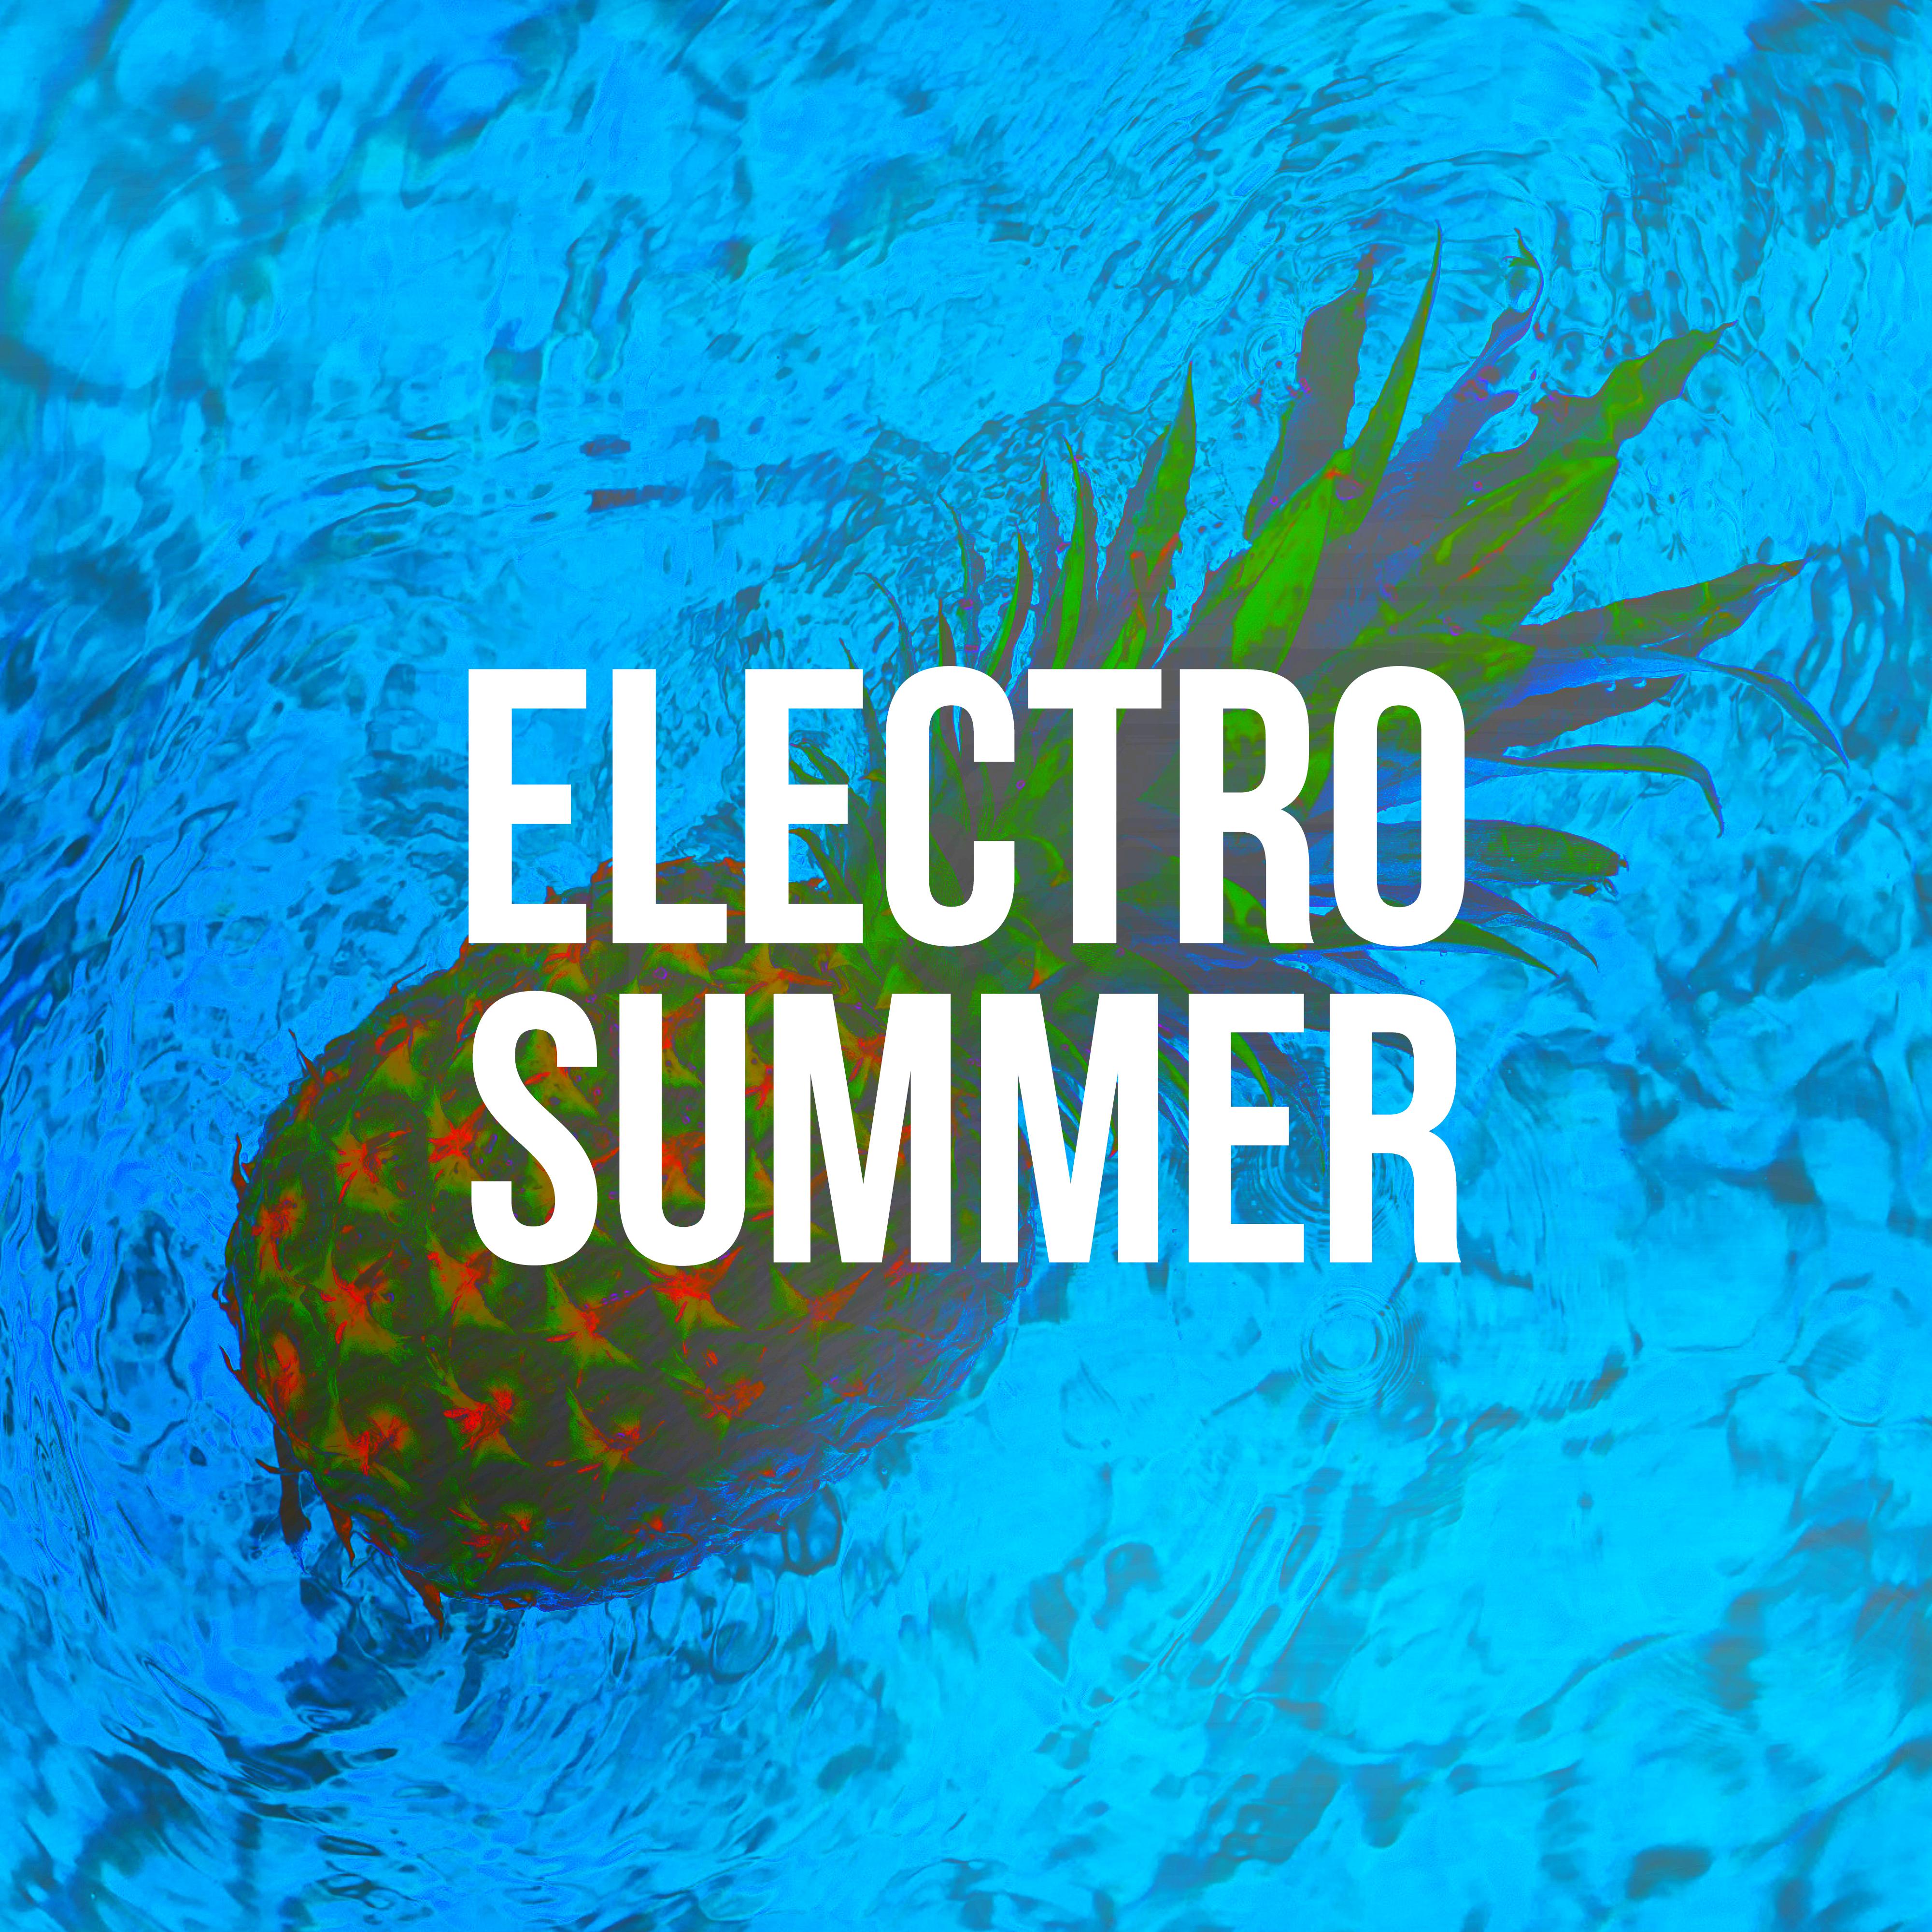 Electro Summer: Electronic Chillout Beats for Vacation, Rest and Relaxation